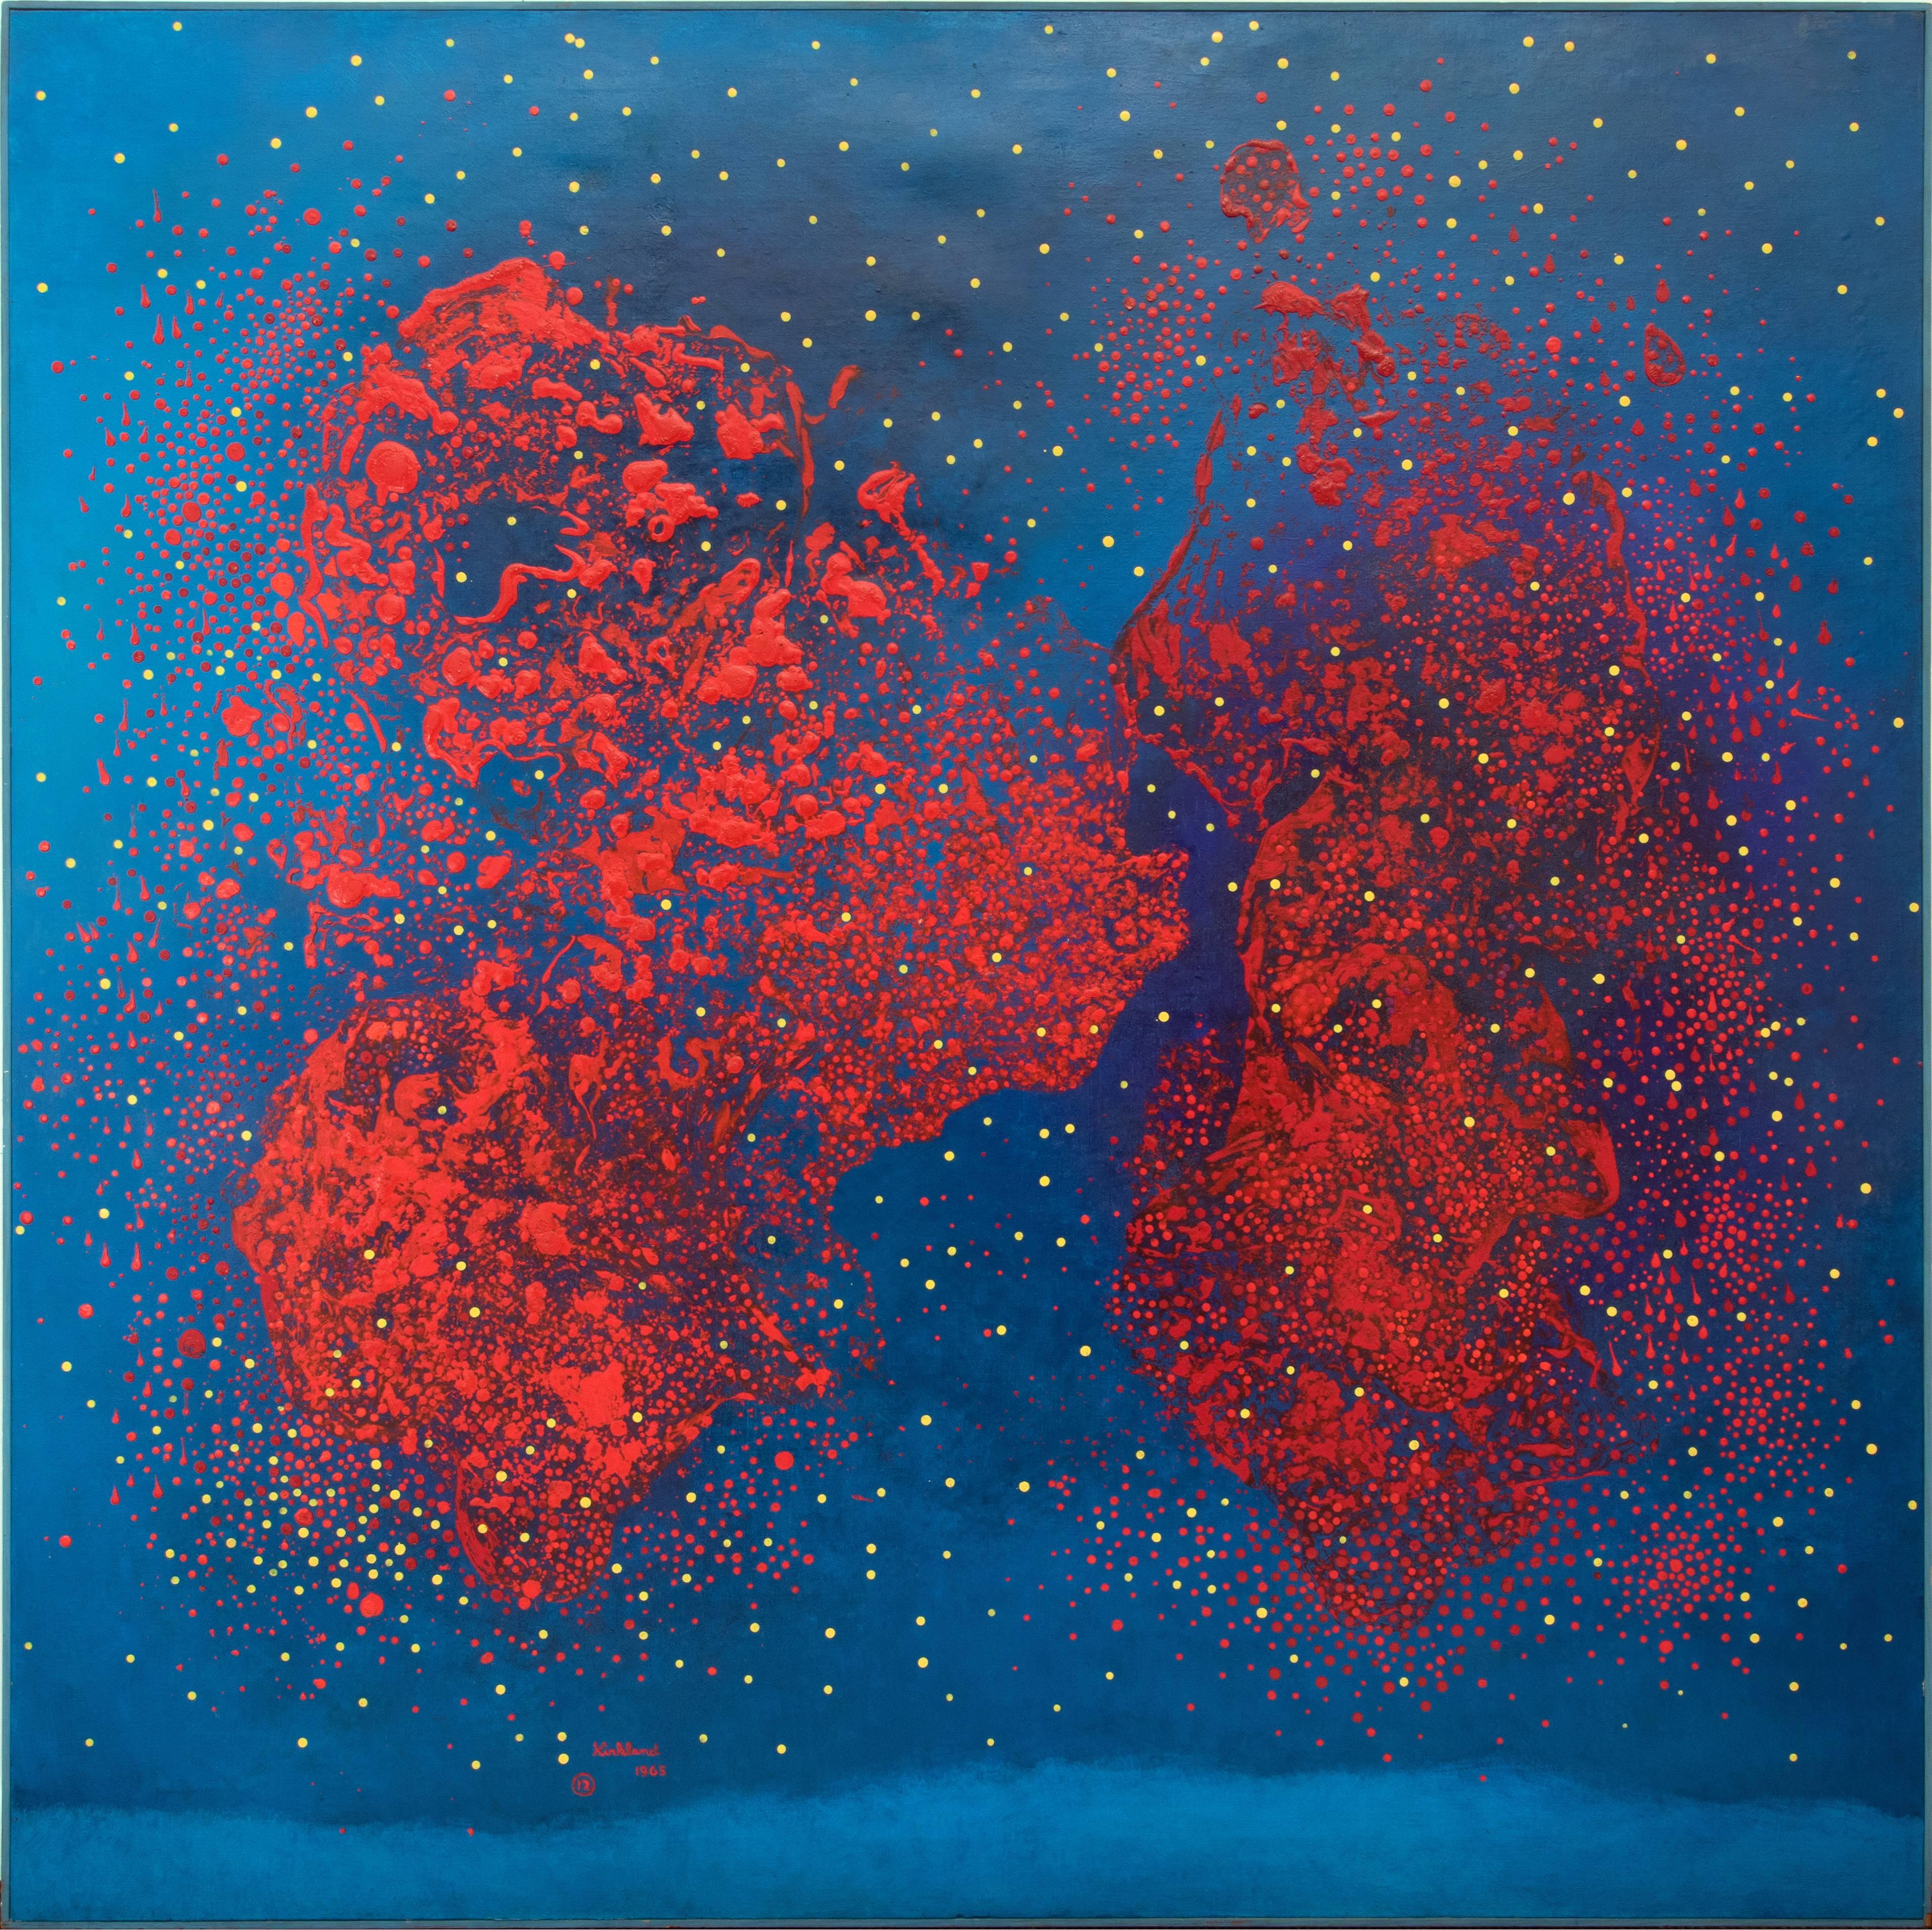 Reds on Blue - Number 12 (Energy of Vibrations in Space Series) - Abstract Painting by Vance Kirkland